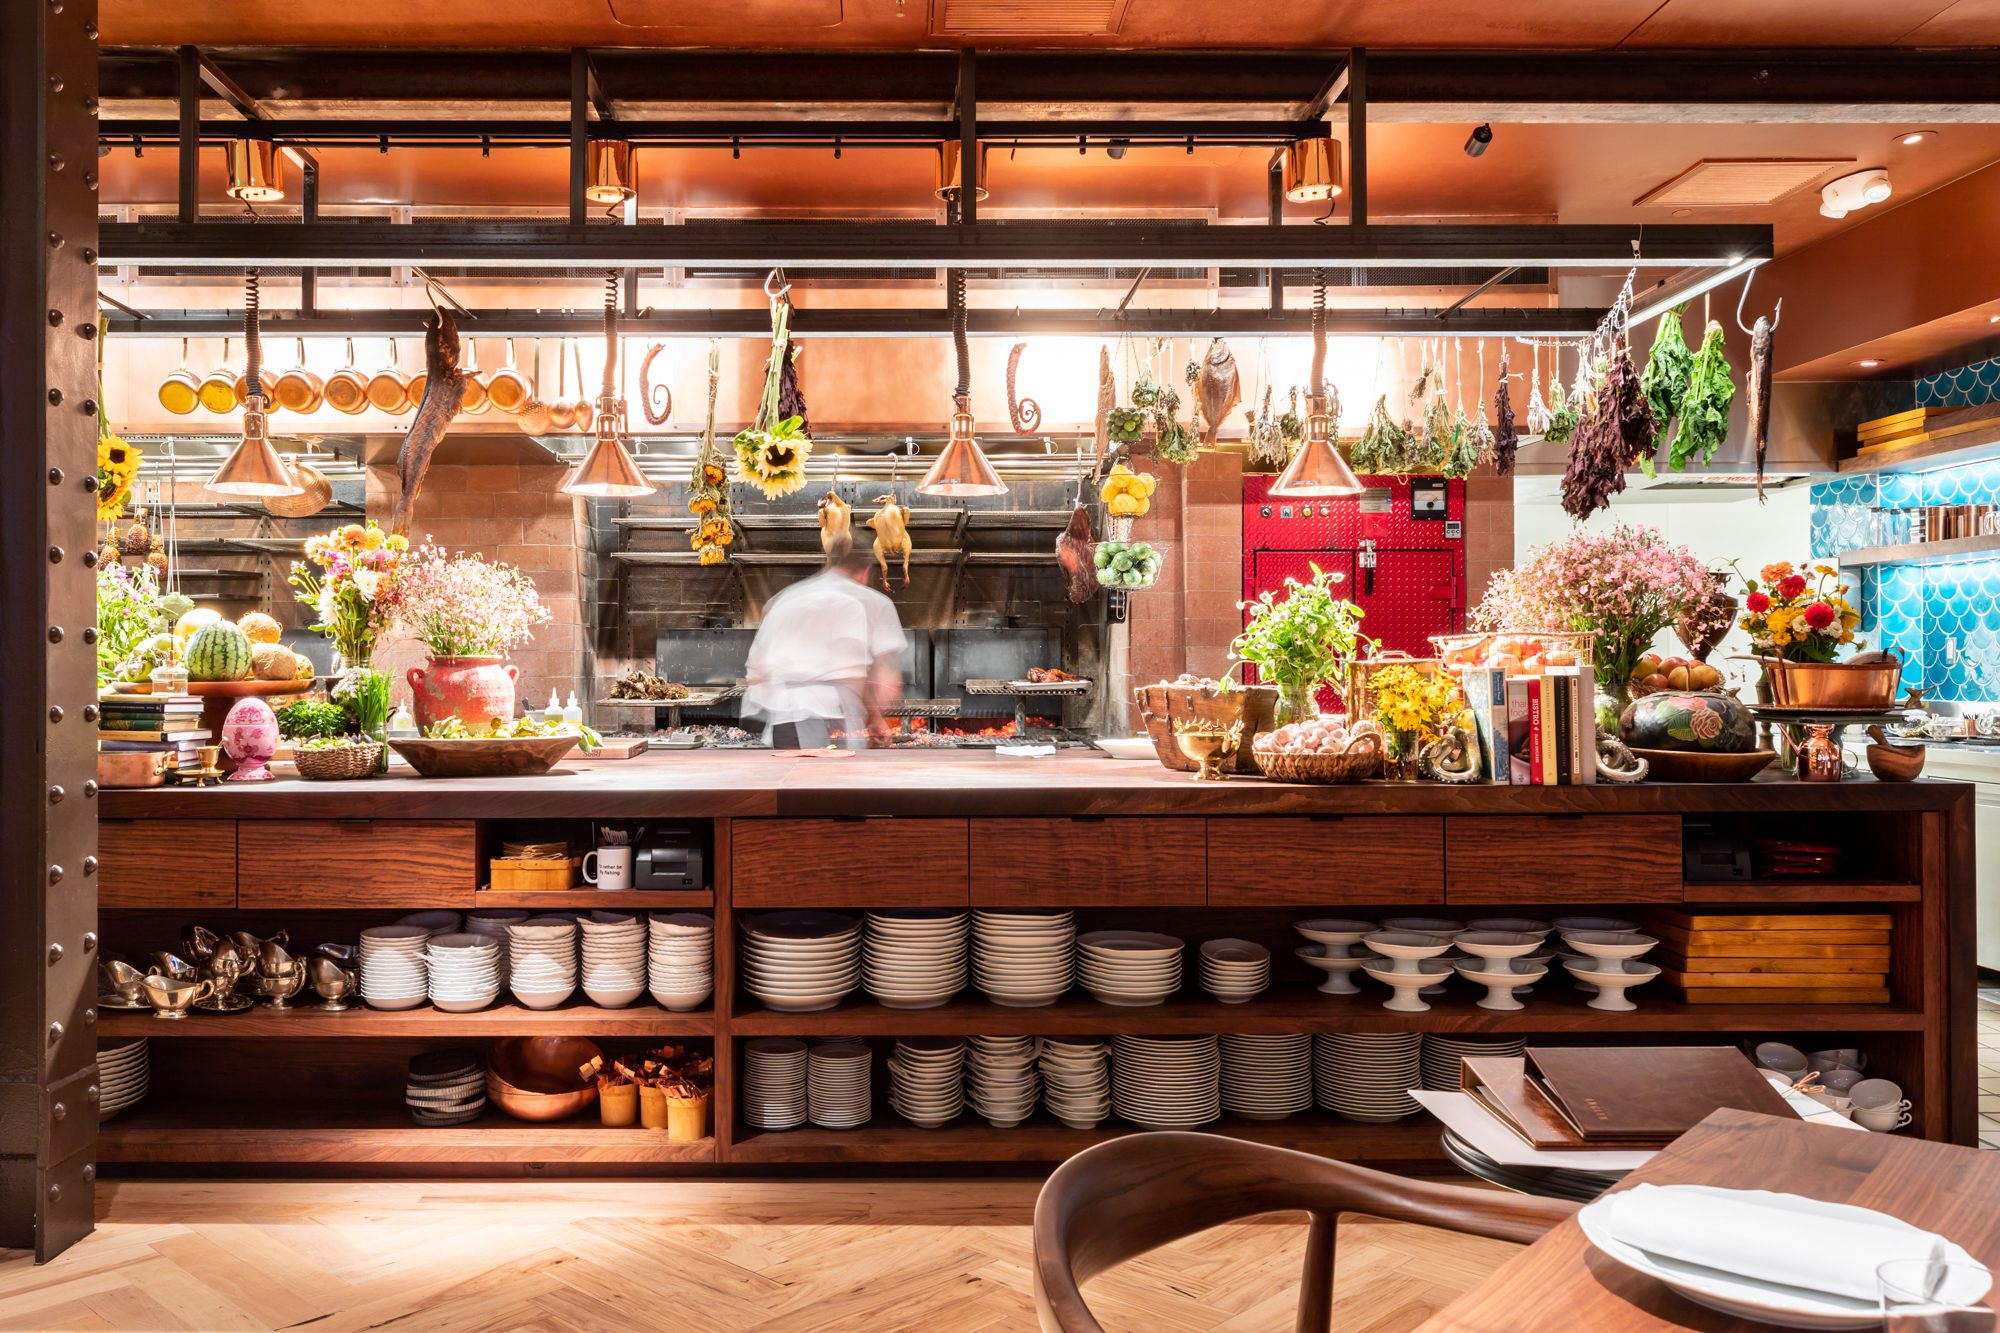 The live fire kitchen at Angler with hanging flowers